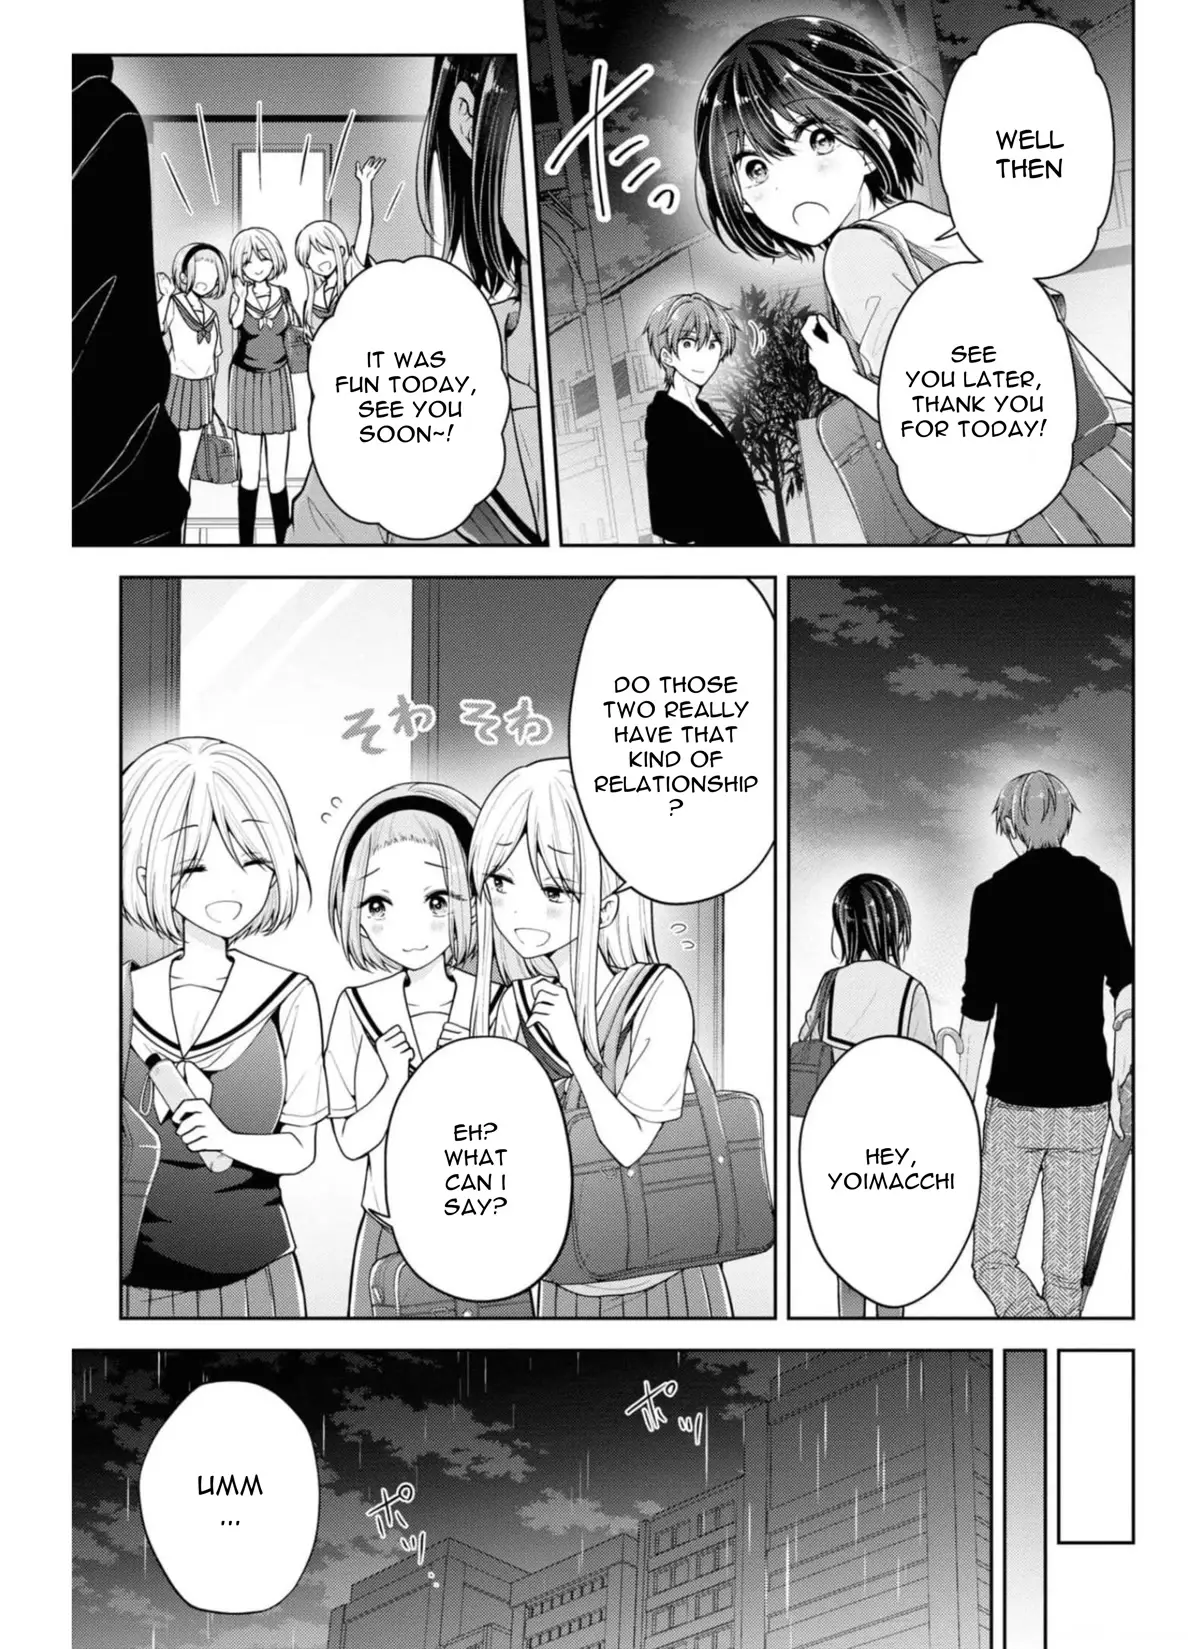 I Turned My Childhood Friend (♂) Into A Girl - 30 page 9-6f81677a